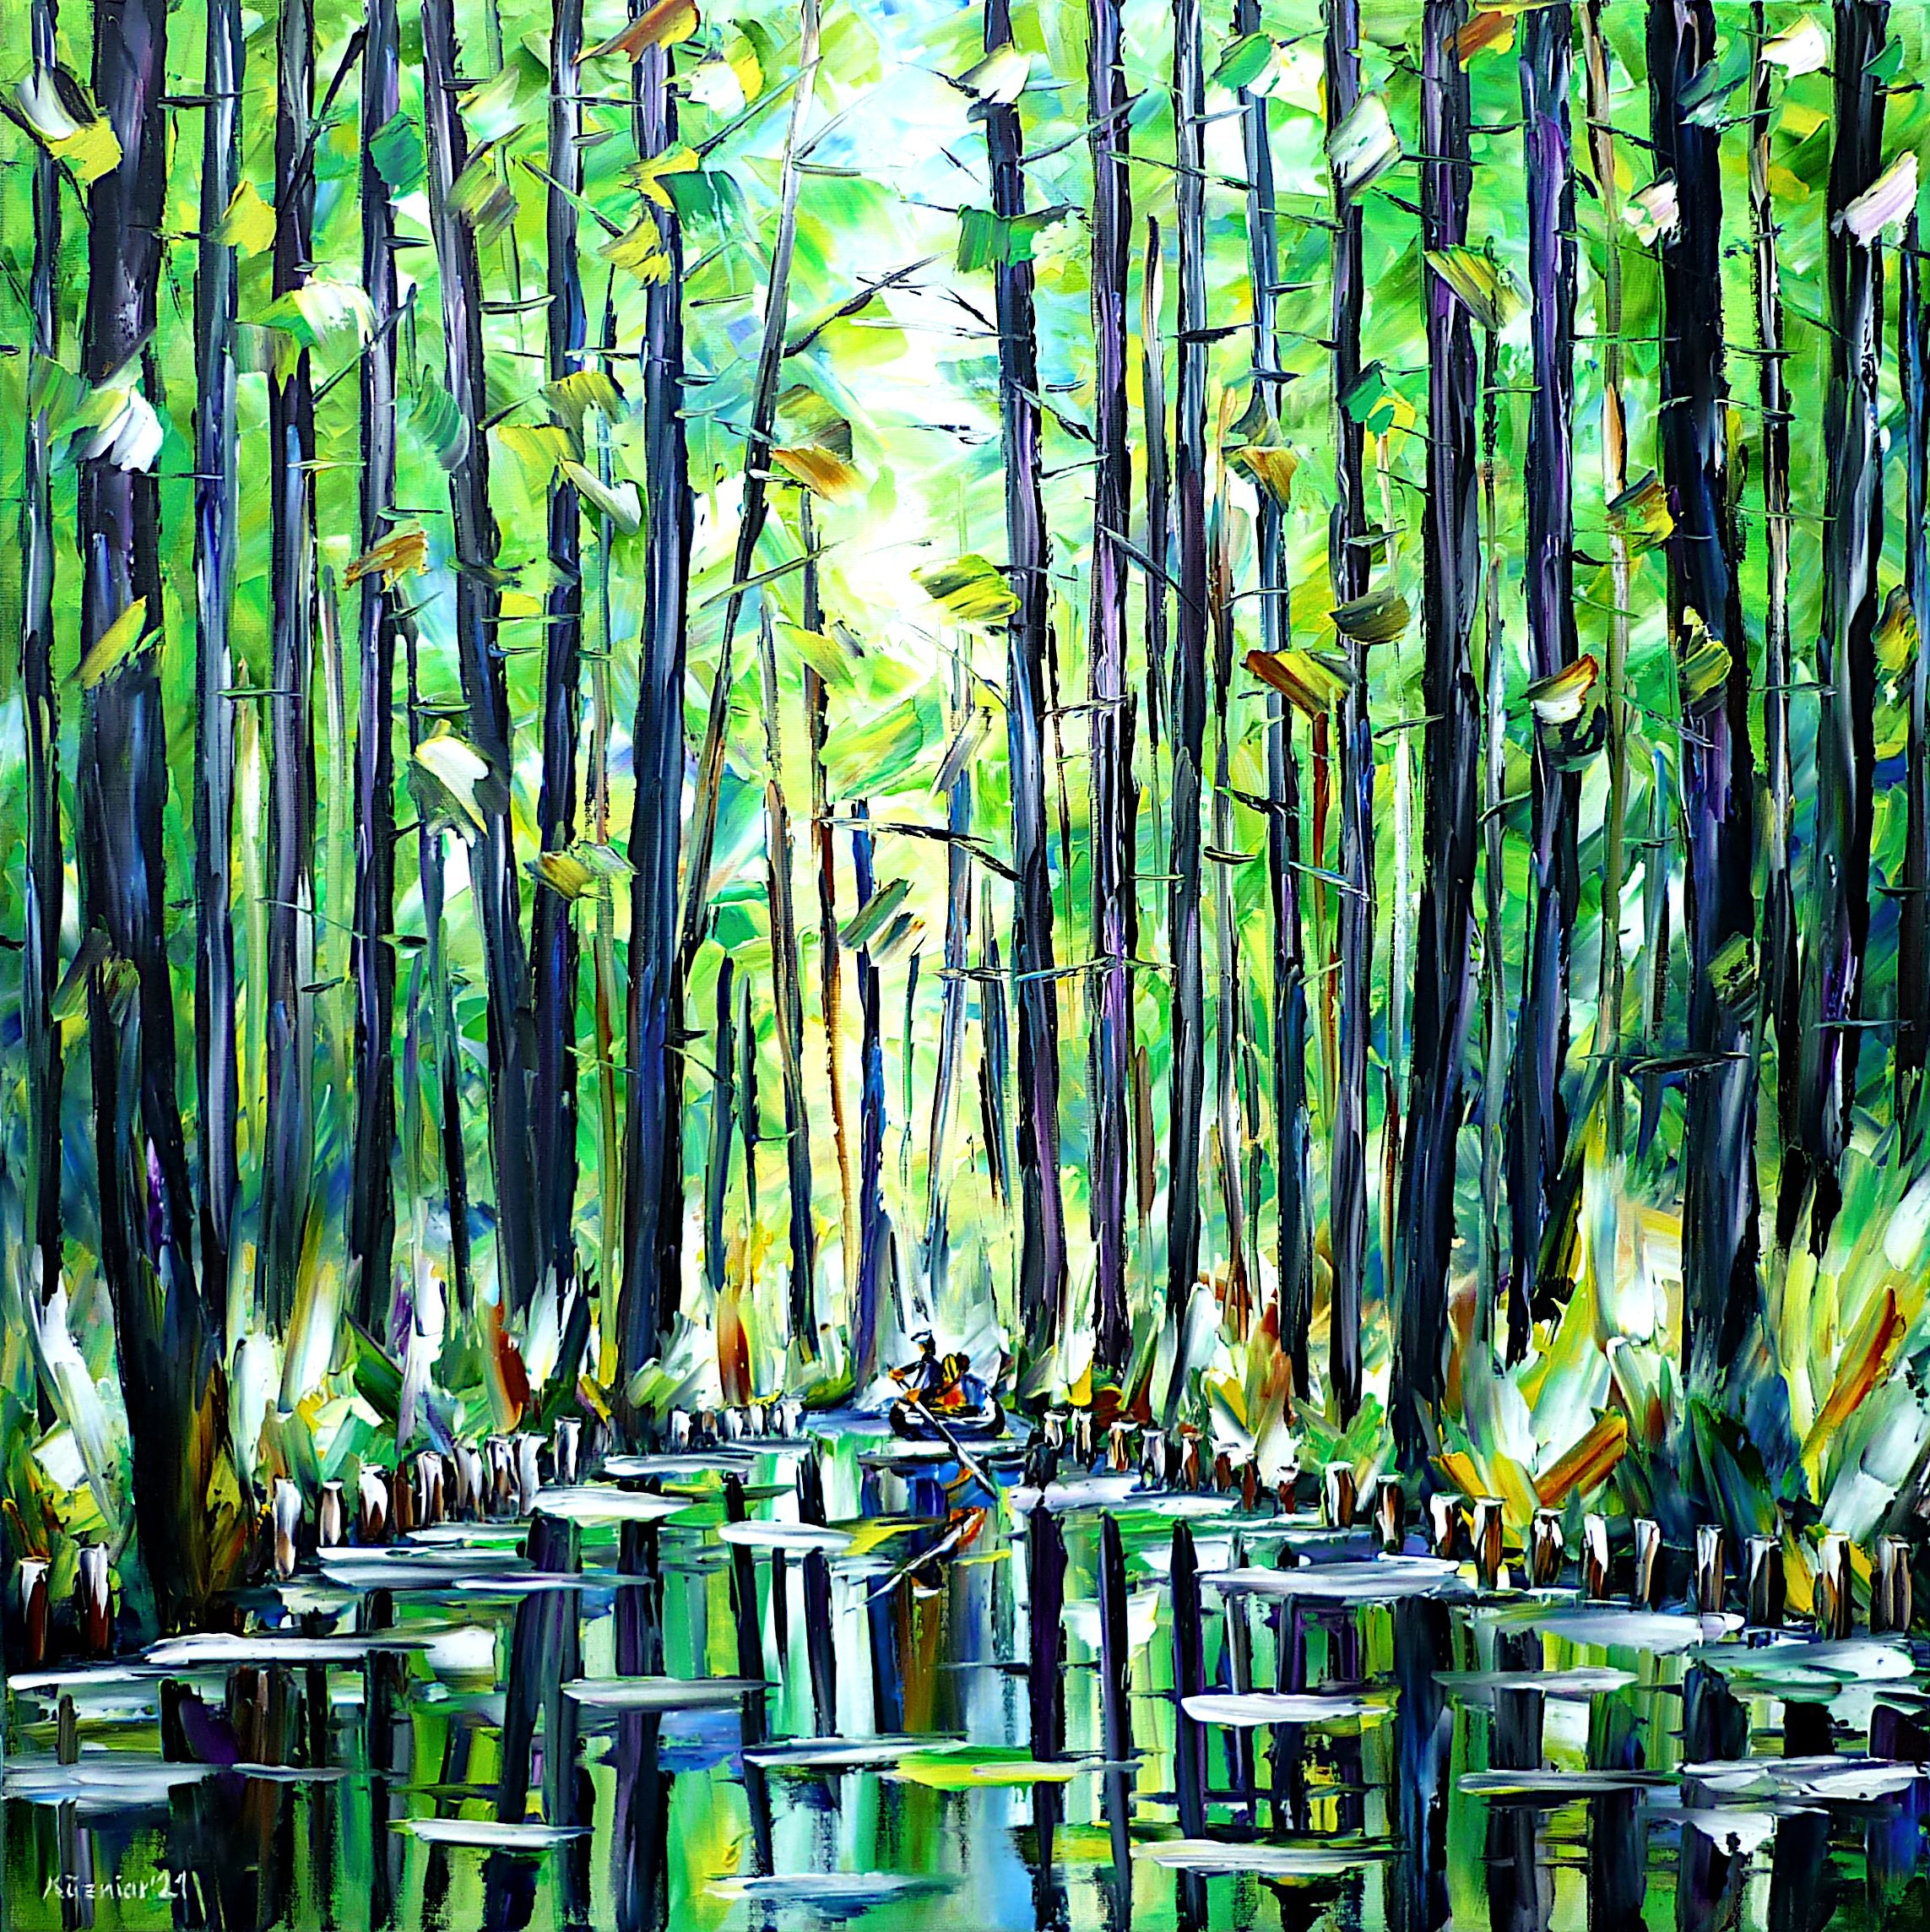 forest river,forest painting,spreewald boat trip,boat tour,german forests,river in the forest,forest trees,spreewald picture,spreewald painting,spreewald landscape,spreewald river landscape,beautiful spreewald,brandenburg,east germany,beautiful germany,german landscape,beautiful nature,peaceful nature,spreewalds rivers,water reflections,green landscape,green nature,spreewald river channels,spreewald love,pure nature,green colors,green painting,square picture,square painting,square format,palette knife oil painting,modern art,impressionism,abstract painting,lively colours,colorful painting,bright colors,light reflections,impasto painting,figurative